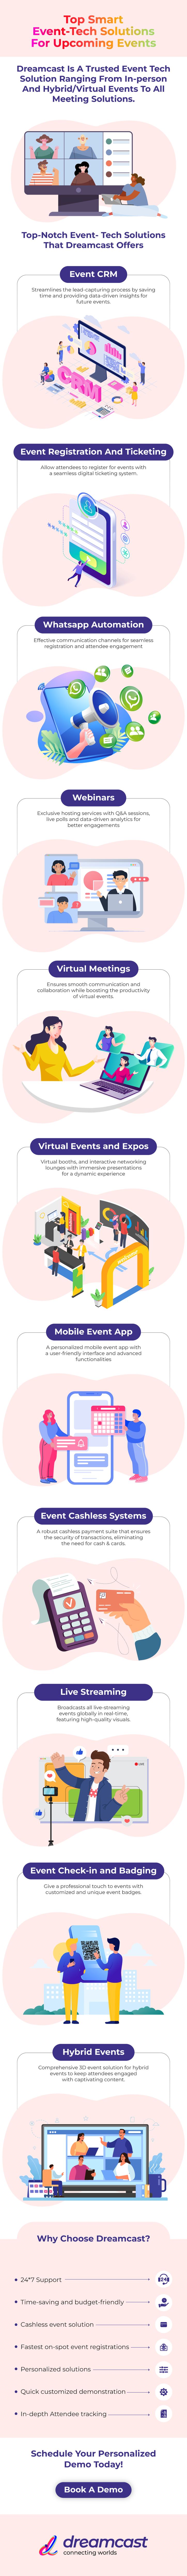 smart event-tech solutions for upcoming events